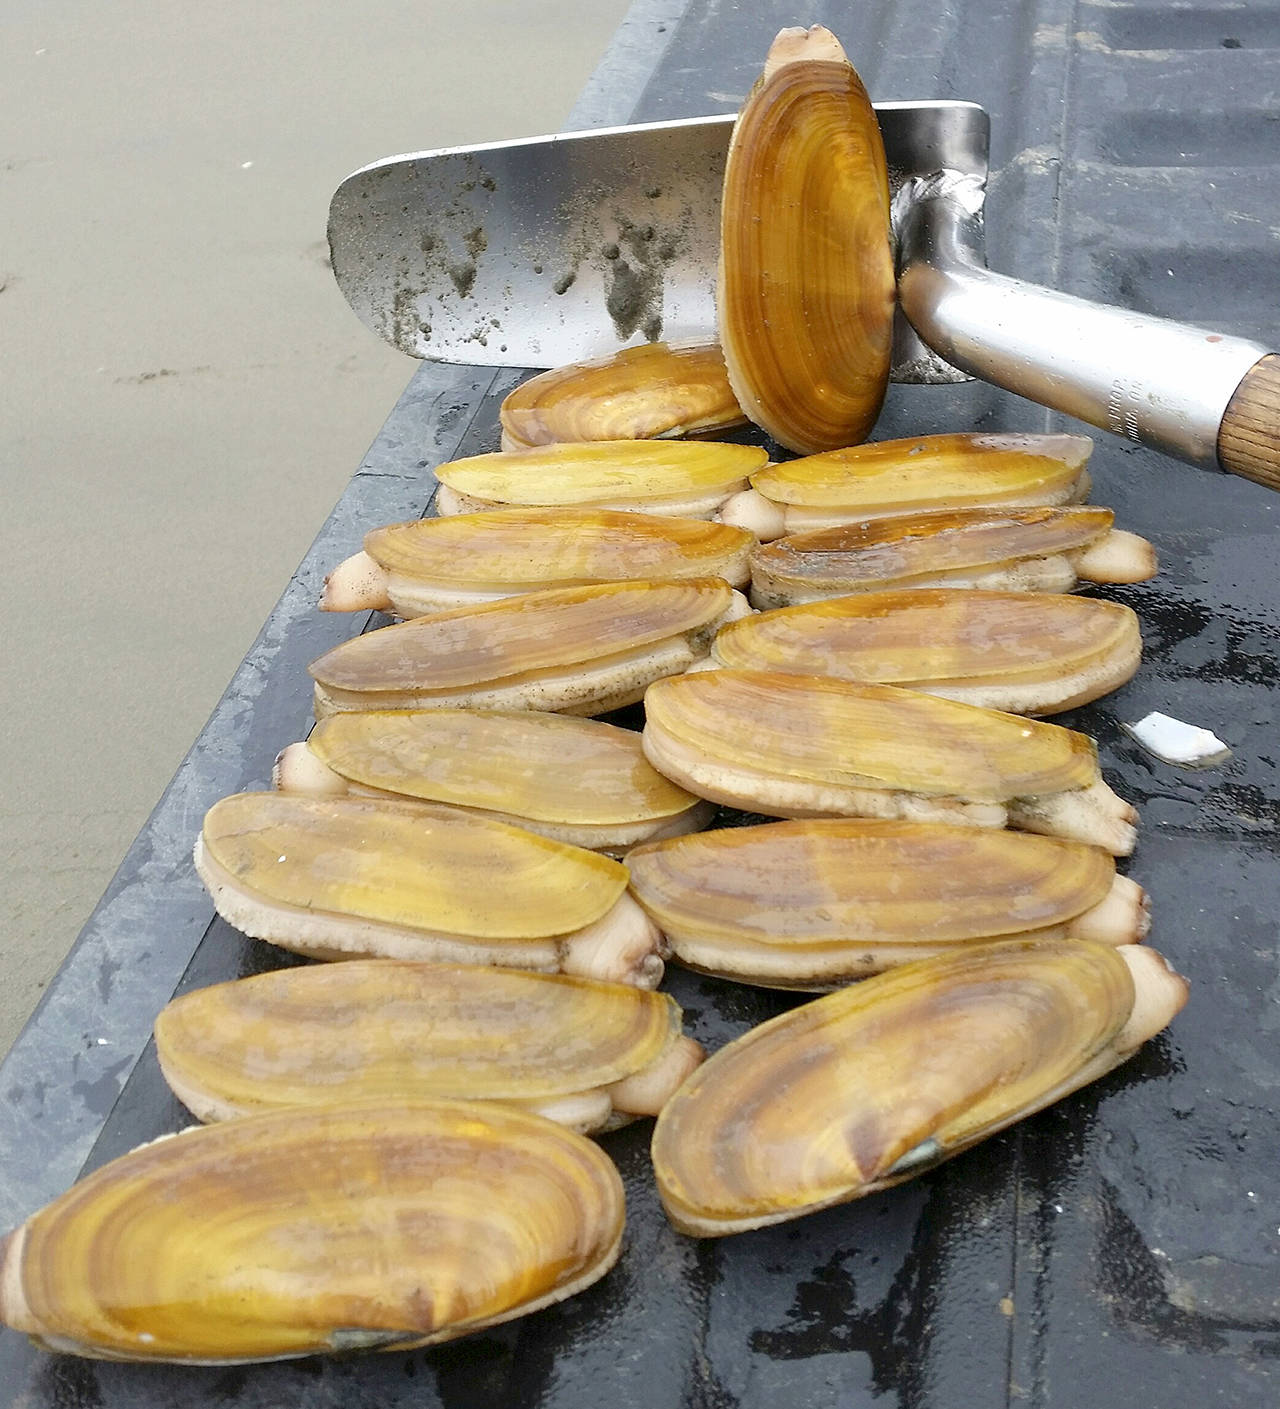 State Department of Fish and Wildlife Razor clam diggers will have plenty of opportunity this fall to dig for limits at the state’s southern beaches. Kalaloch Beach in western Jefferson County is not expected to host any digs this year.